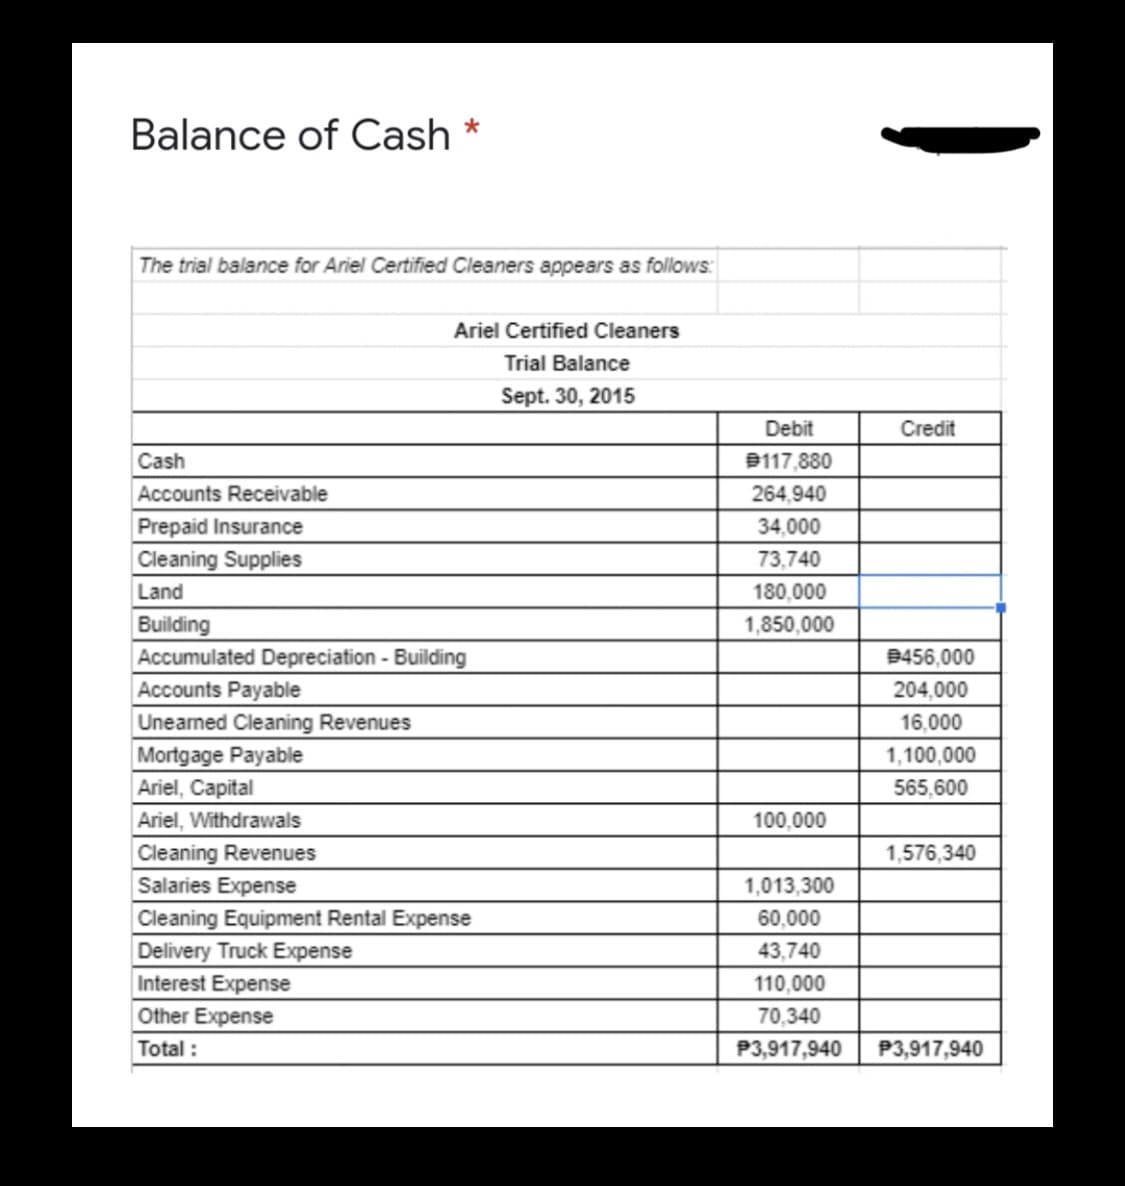 Balance of Cash *
The trial balance for Ariel Certified Cleaners appears as follows:
Ariel Certified Cleaners
Trial Balance
Sept. 30, 2015
Debit
Credit
Cash
B117,880
Accounts Receivable
264,940
Prepaid Insurance
34,000
Cleaning Supplies
73,740
Land
180,000
Building
1,850,000
Accumulated Depreciation - Building
9456,000
Accounts Payable
204,000
Uneaned Cleaning Revenues
16,000
Mortgage Payable
1,100,000
Ariel, Capital
565,600
Ariel, Withdrawals
100,000
Cleaning Revenues
1,576,340
Salaries Expense
1,013,300
Cleaning Equipment Rental Expense
60,000
Delivery Truck Expense
43,740
Interest Expense
110,000
Other Expense
70,340
Total :
P3,917,940
P3,917,940
